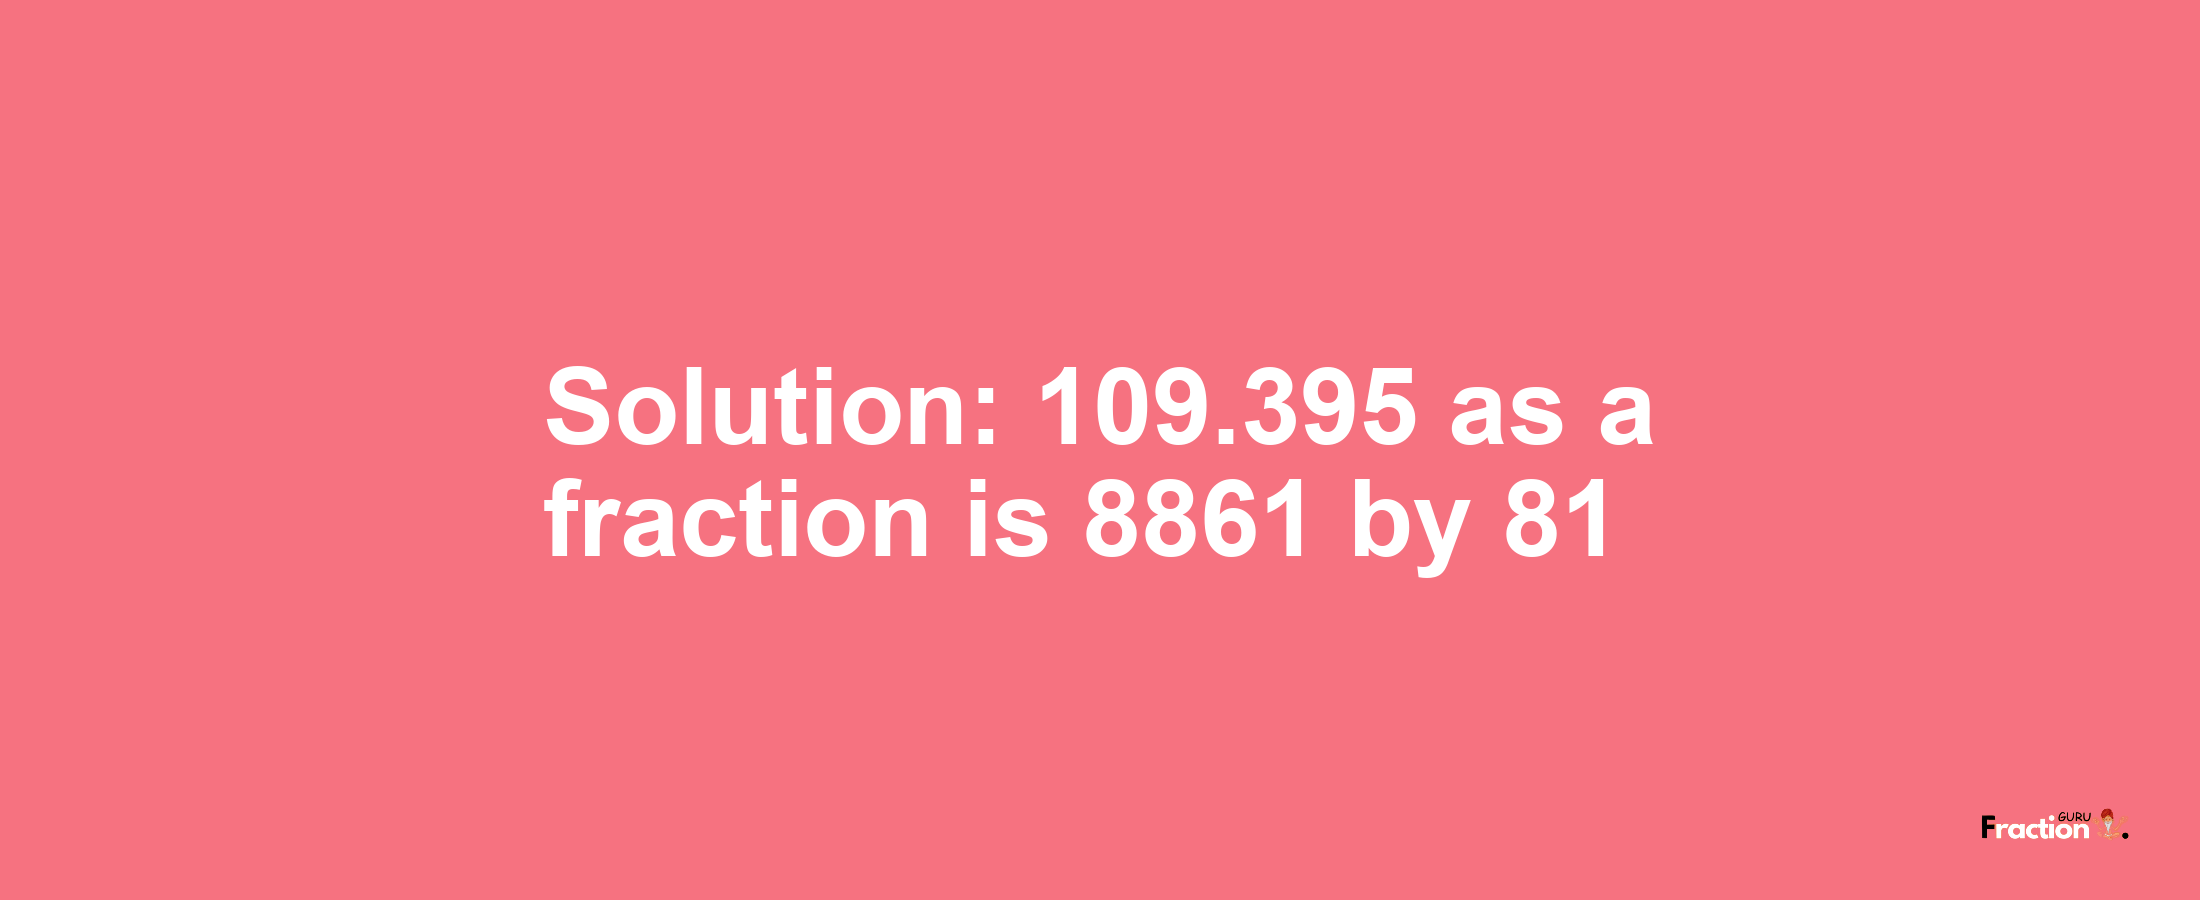 Solution:109.395 as a fraction is 8861/81